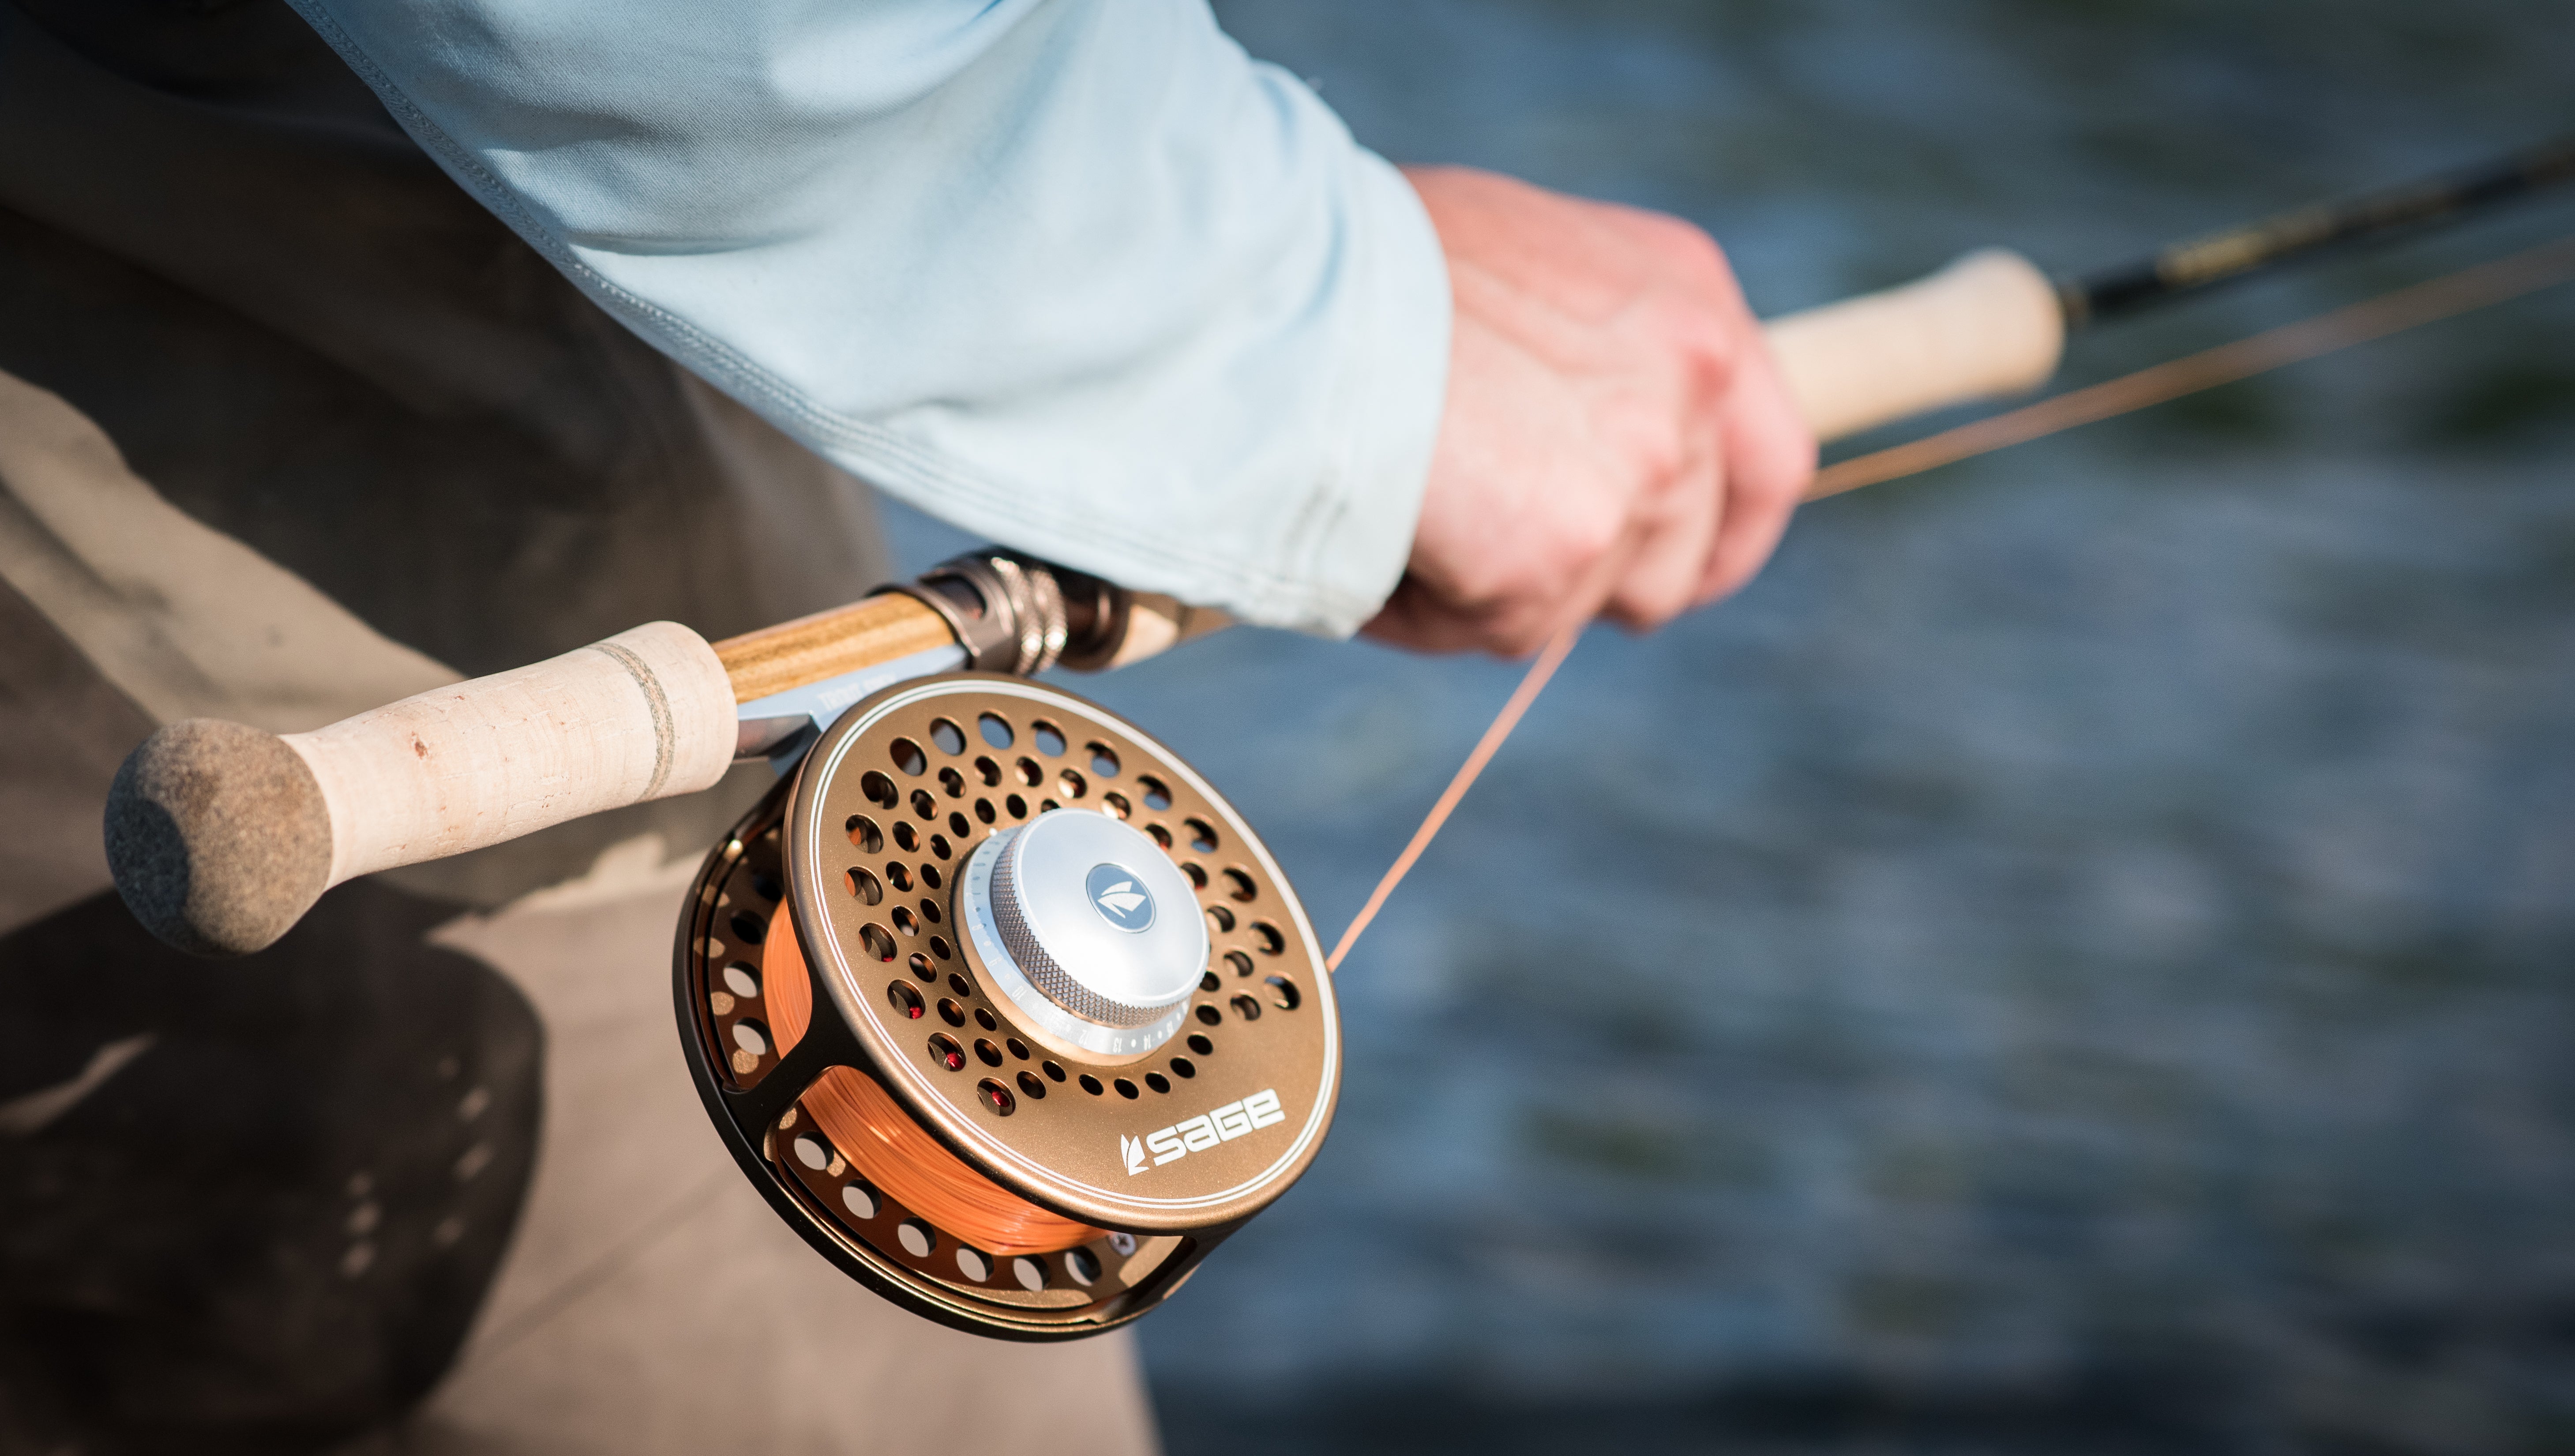 Sage Trout Fly Reel – Fish Tales Fly Shop